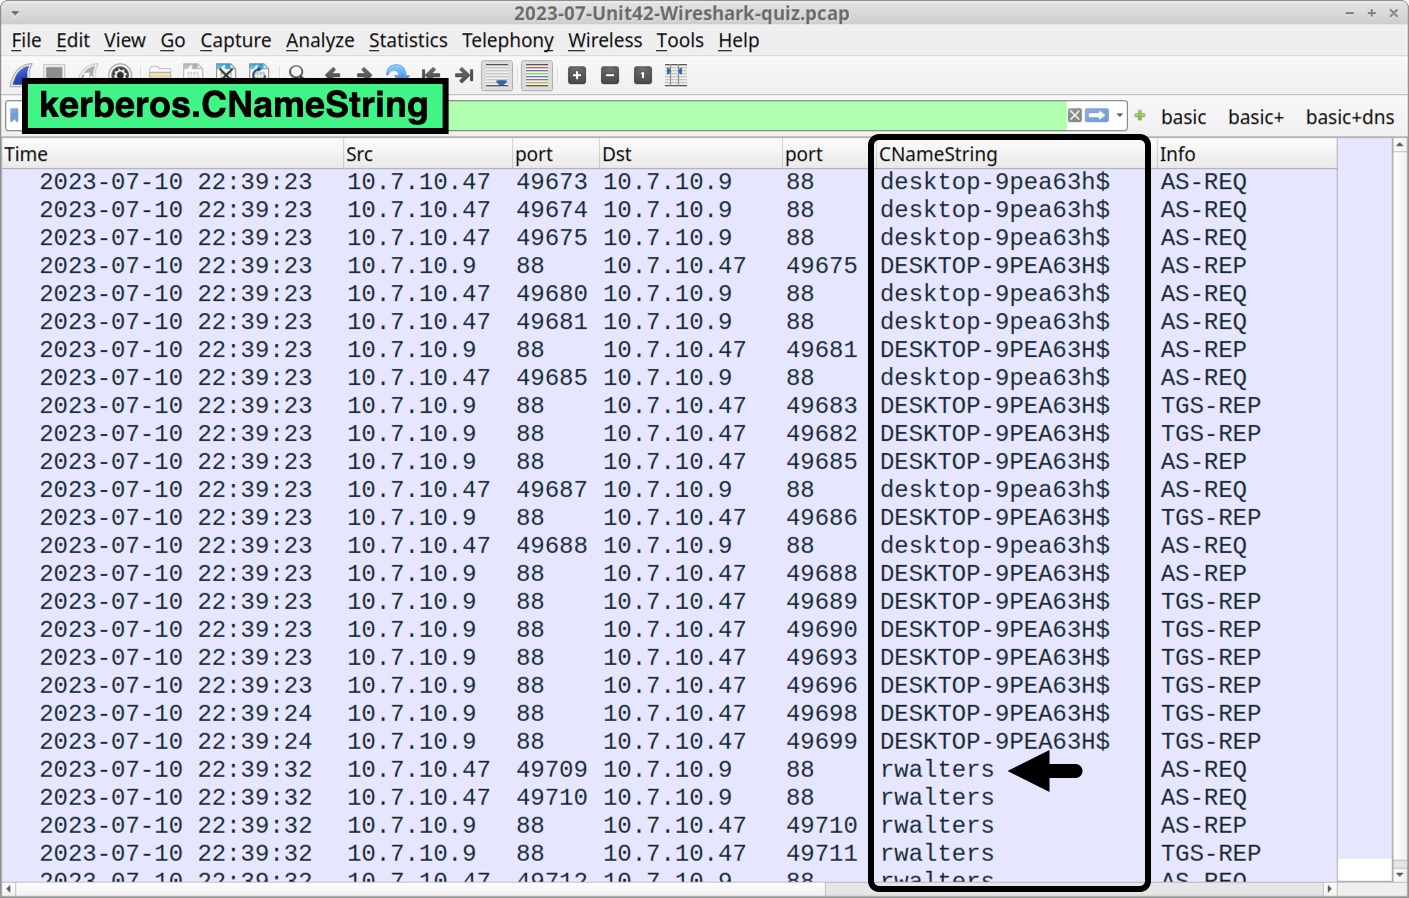 Image 3 is a screenshot of Wireshark. A green box indicates the traffic filter is set to kerberos.CNameString. A black outline draws the eye to the CNameString column. A black arrow points to rwalters at the bottom of this column.